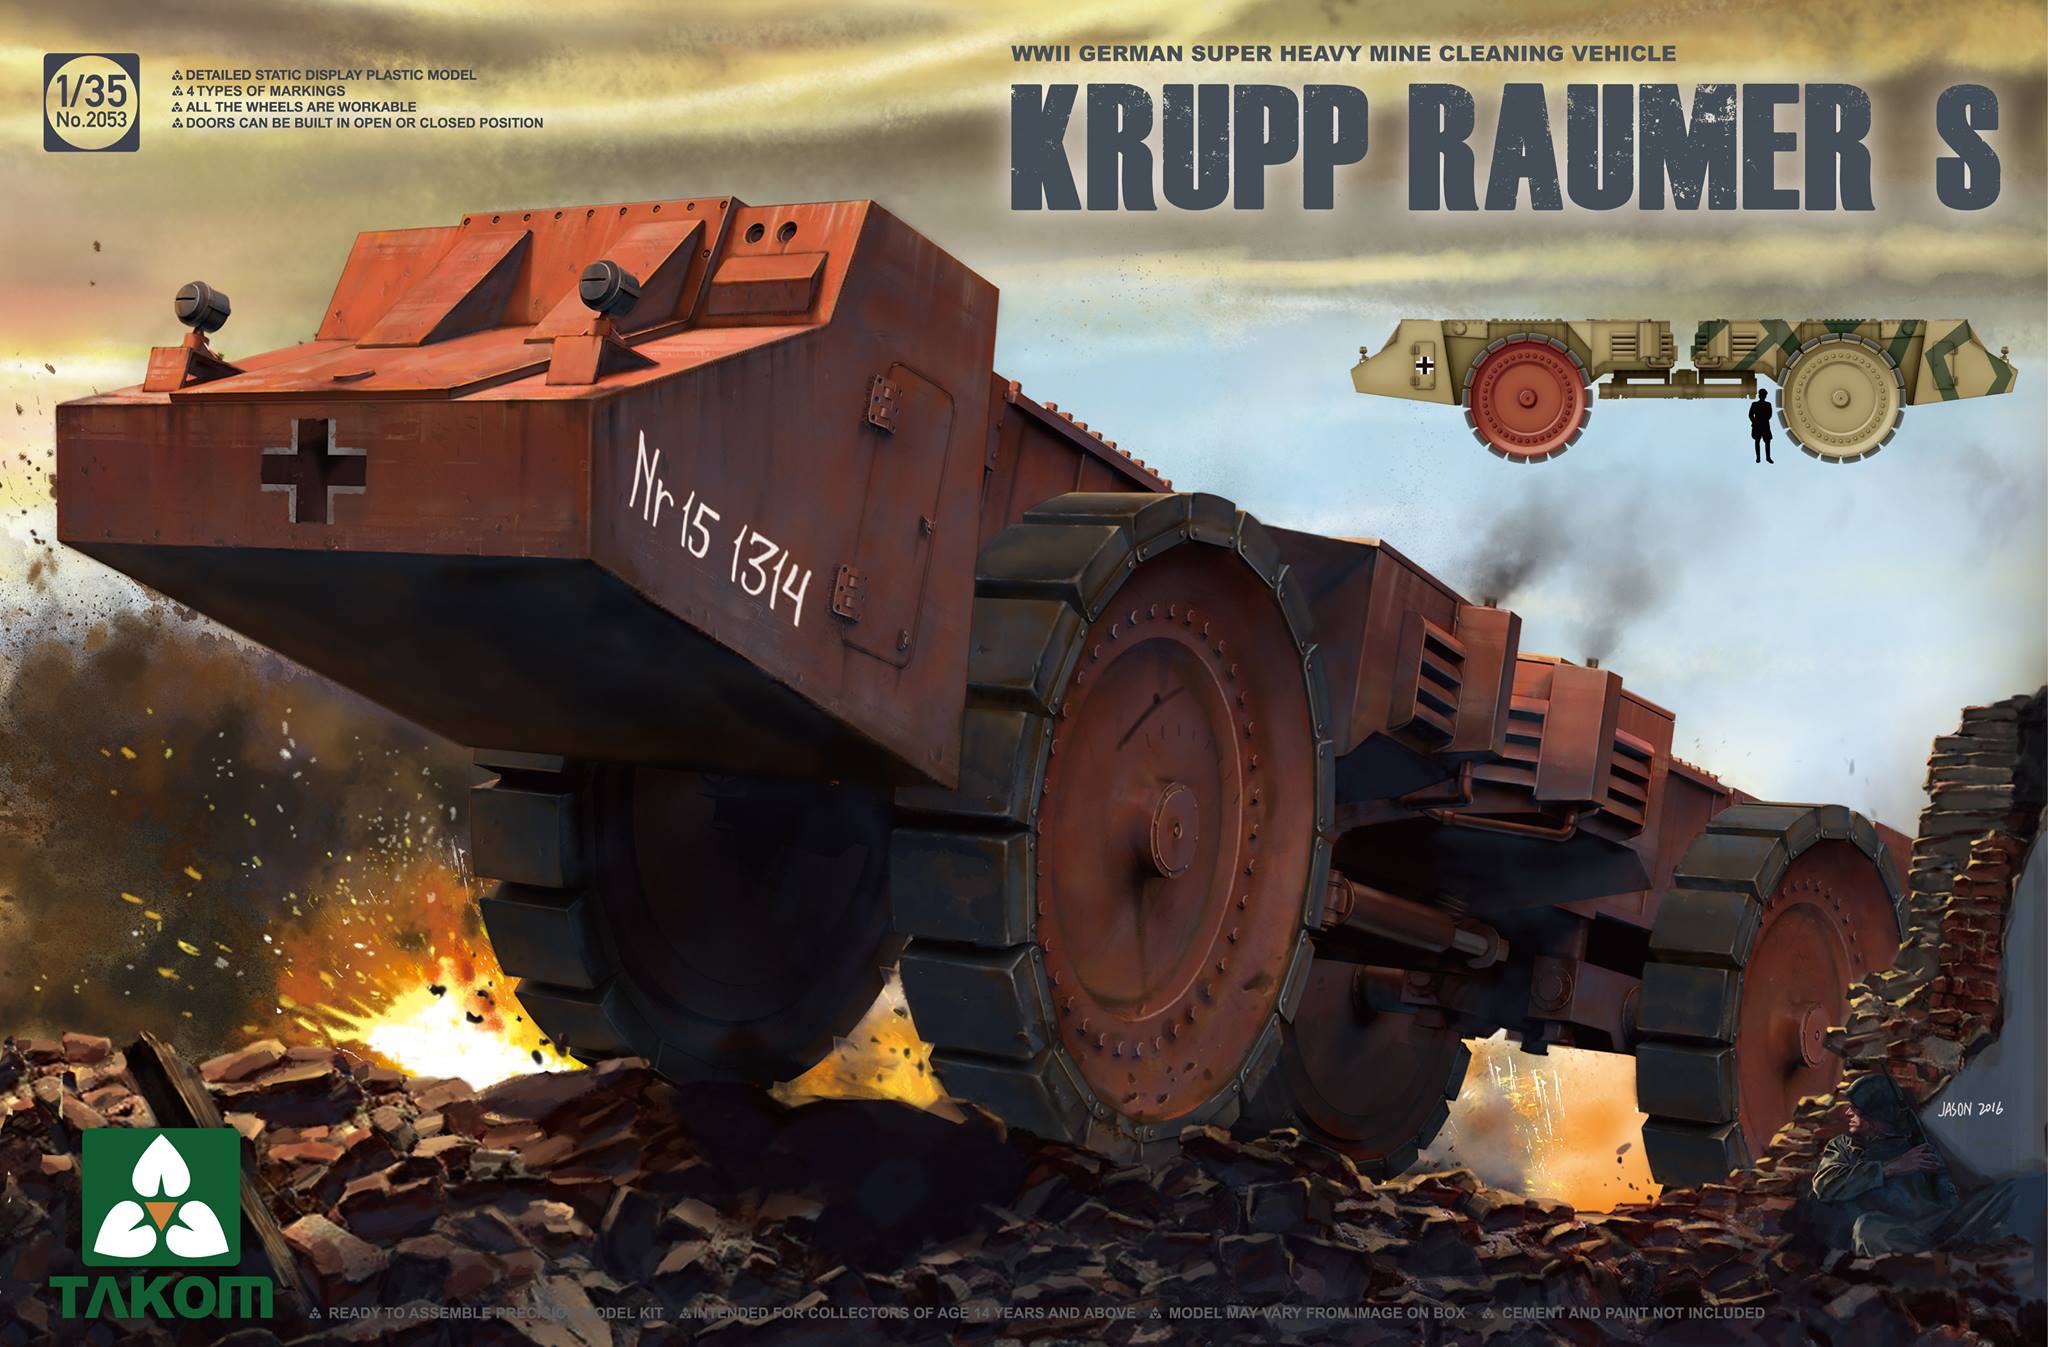 WWII German Super Heavy Mine Cleaning Vehicle Krupp Raumer S